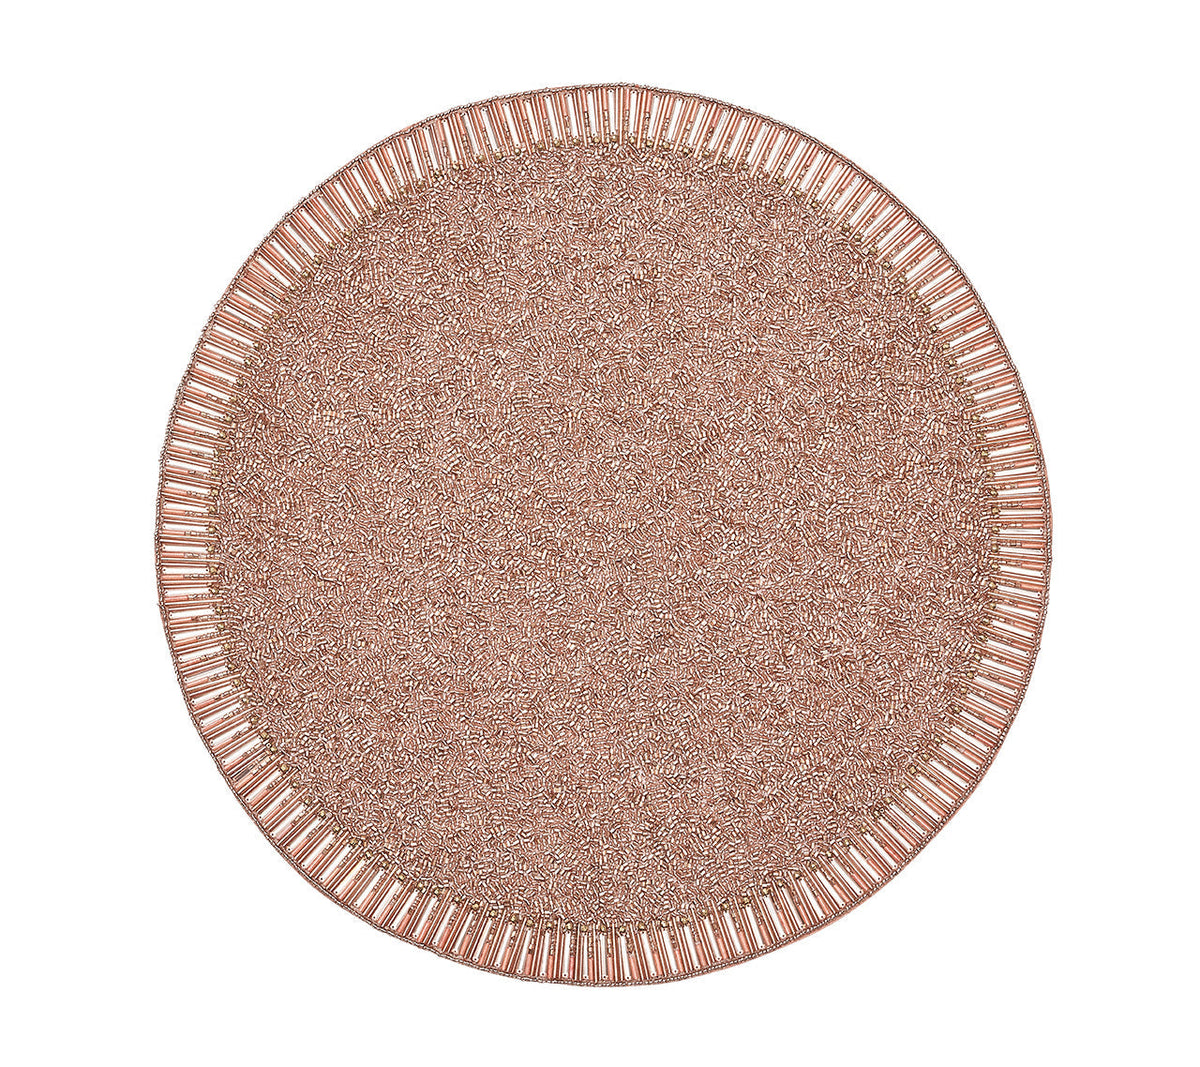 Round Bevel Placemat in pink with glass and acrylic beads around to create a halo effect